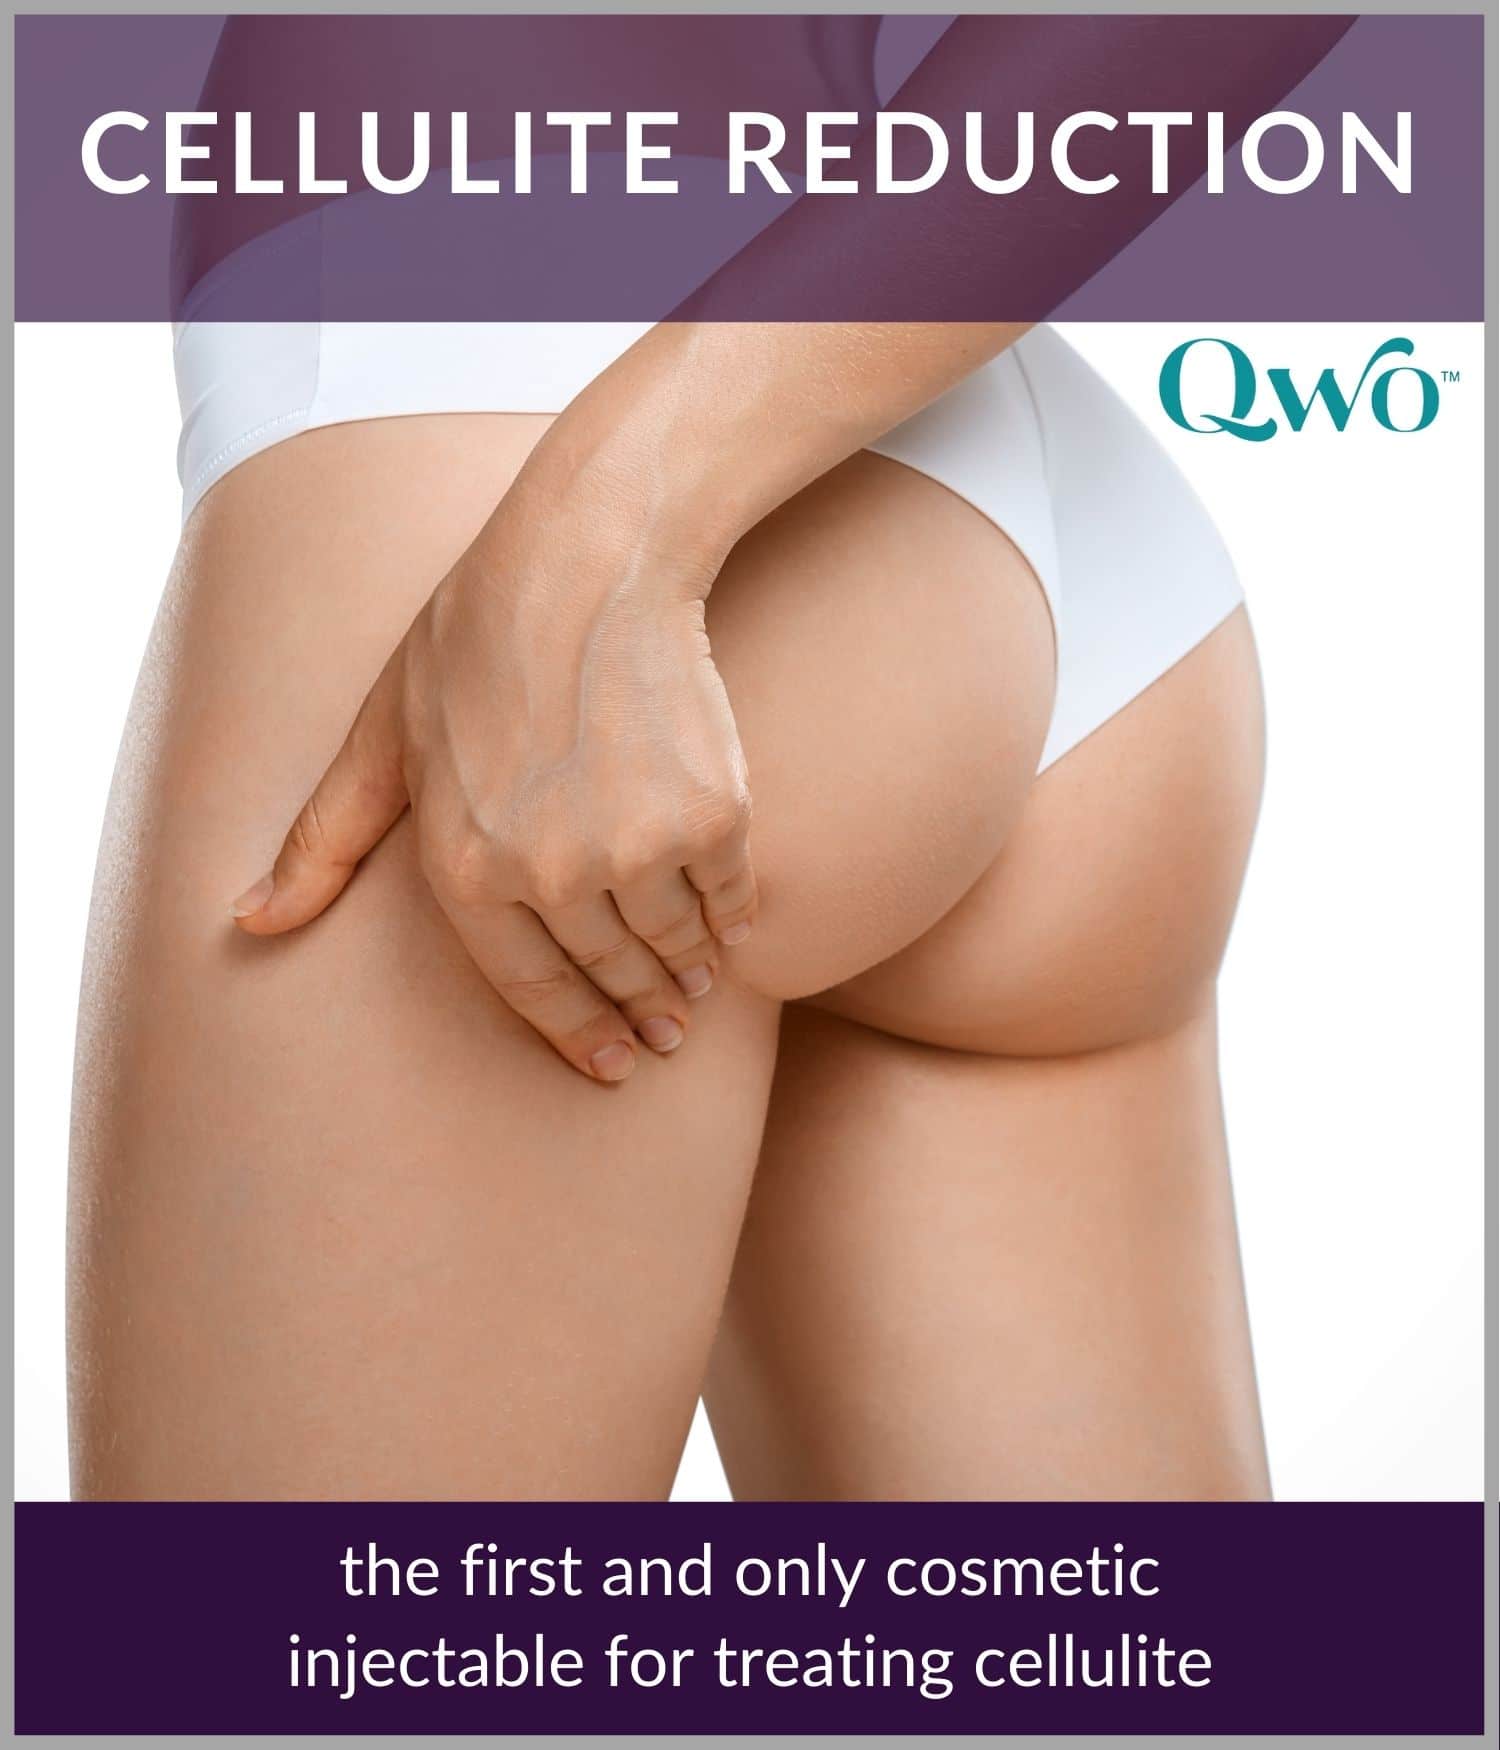 Woman pinches her thigh promoting QWO cellulite reduction